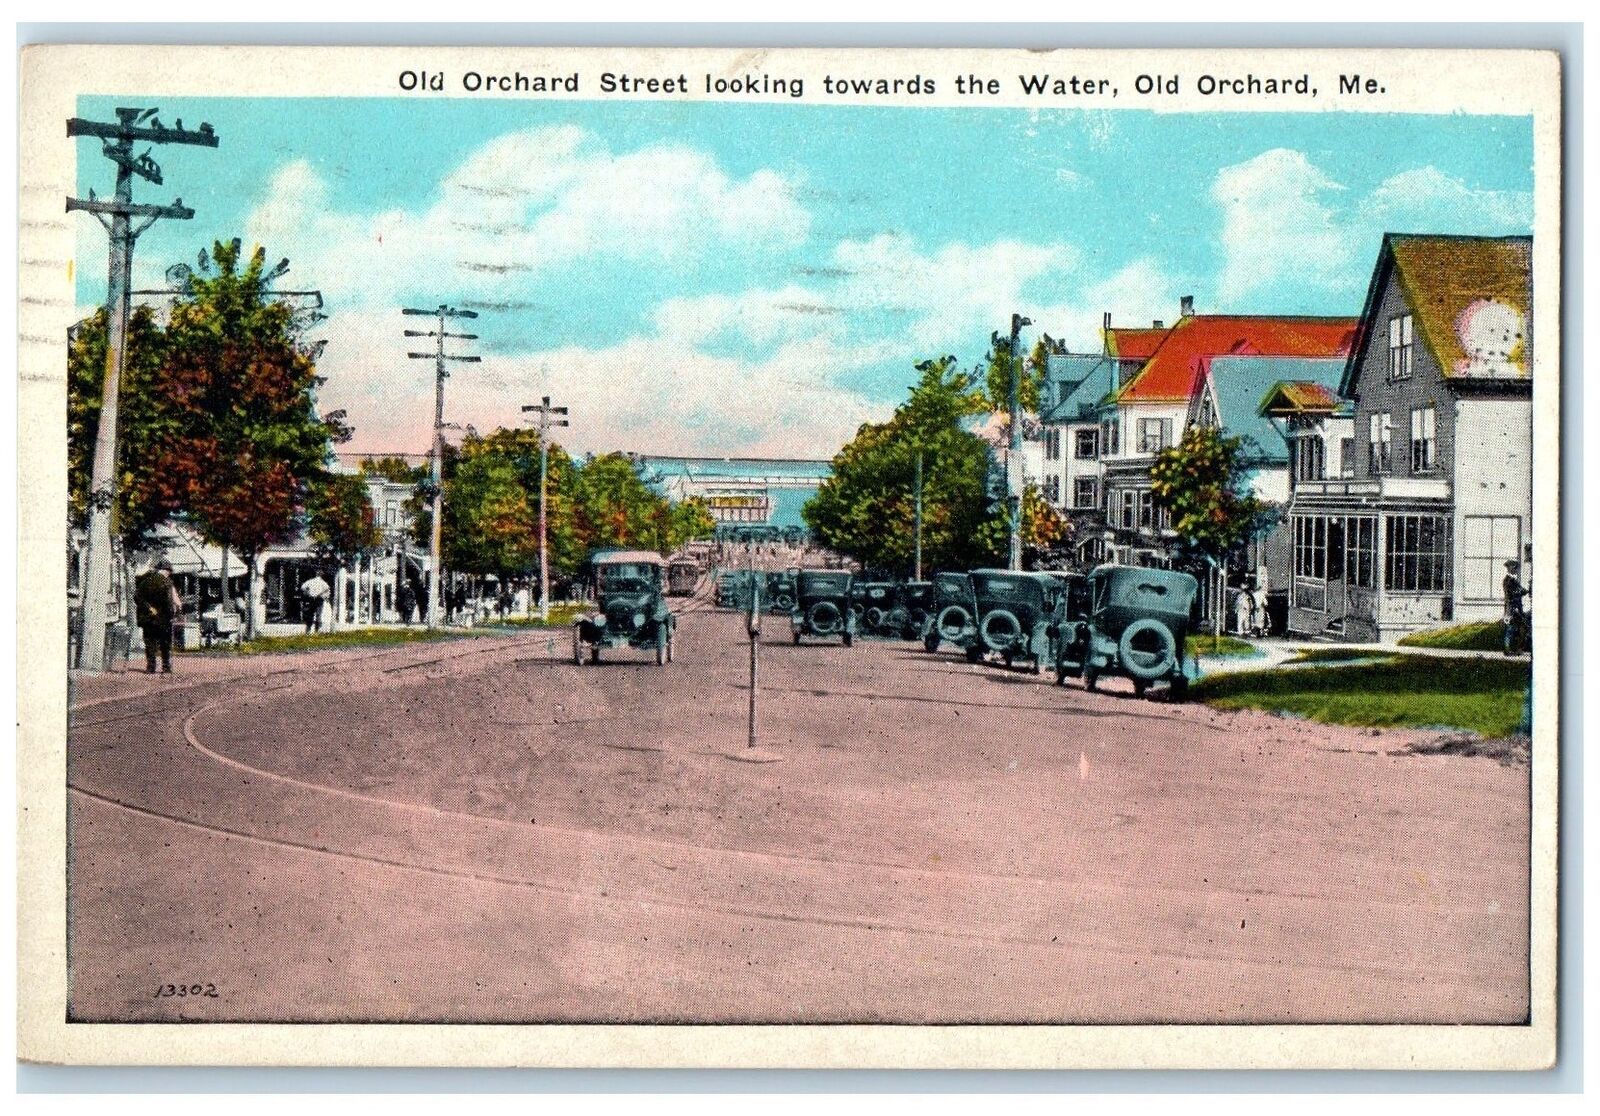 1928 Old Orchard Street Classic Car Dirt Road Railway Old Orchard Maine Postcard